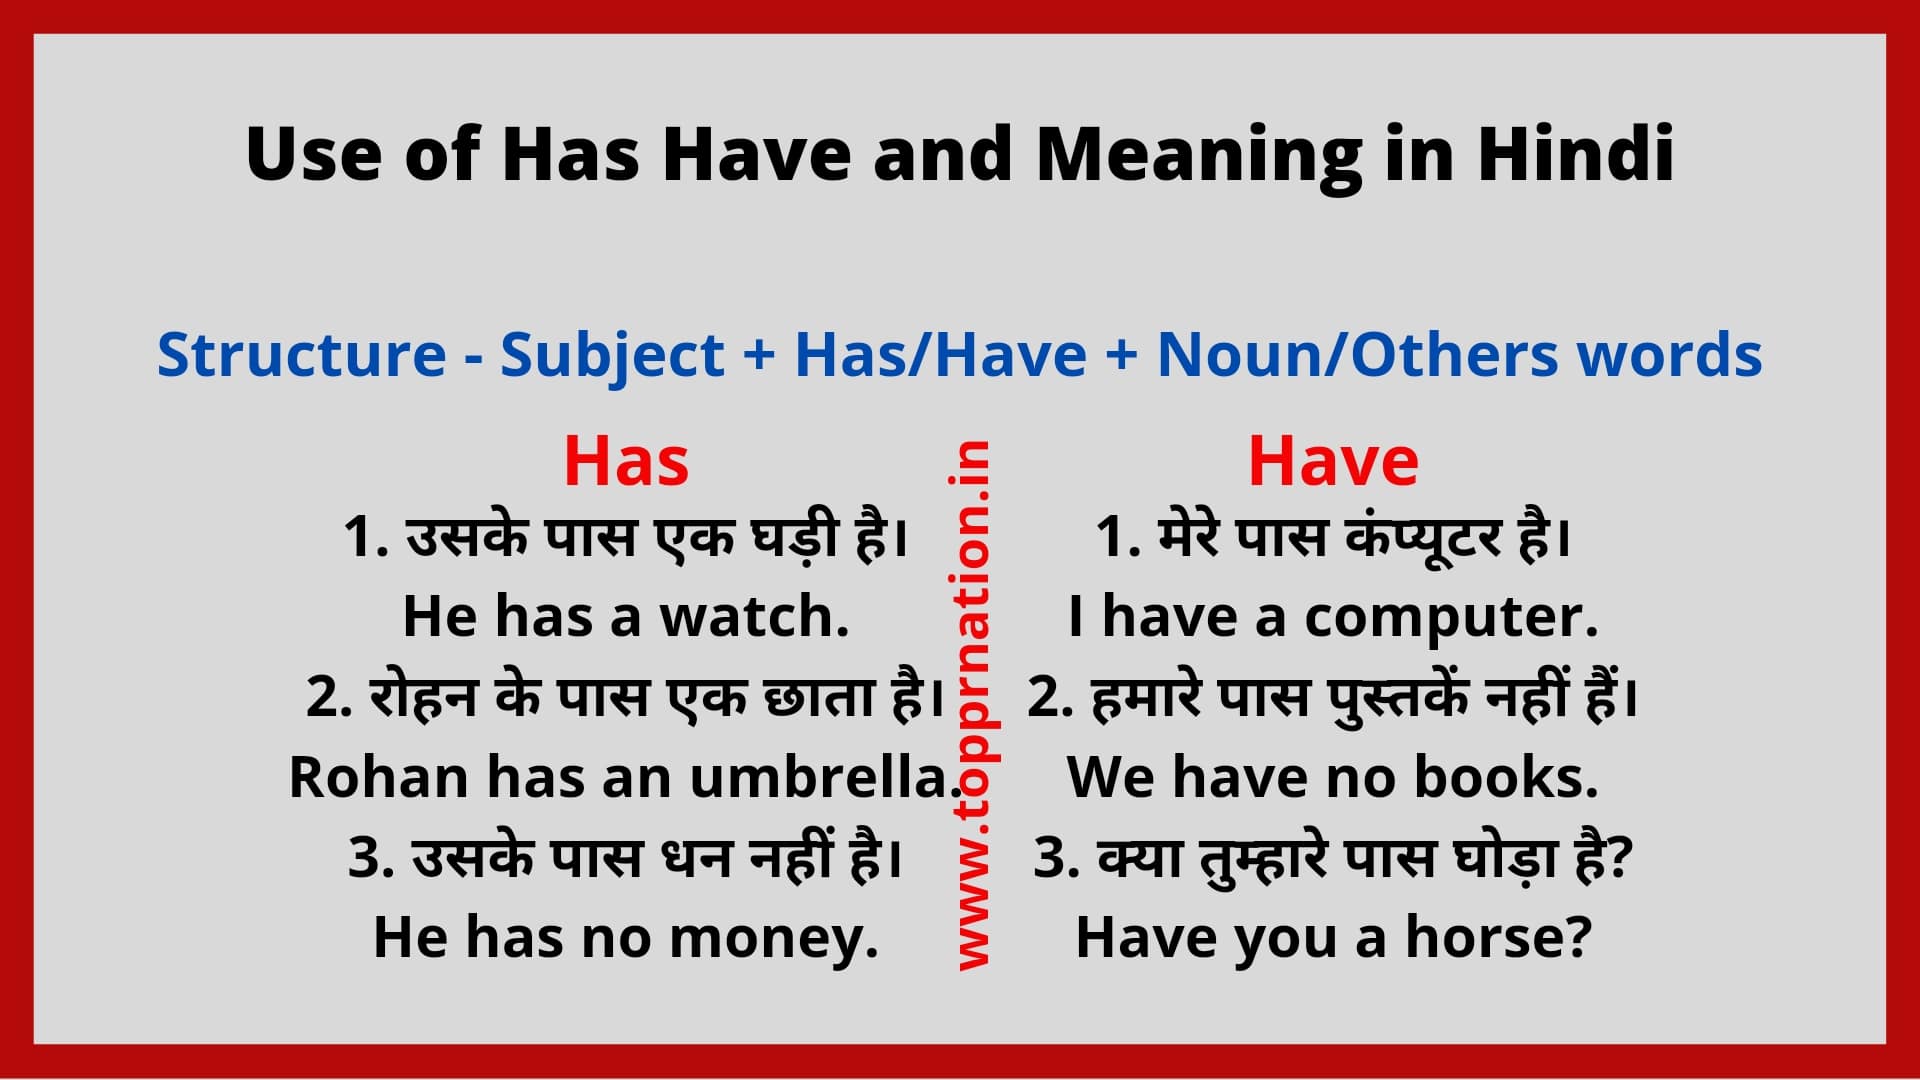 Use of Has and Have in Hindi - Meaning, Rules and Examples